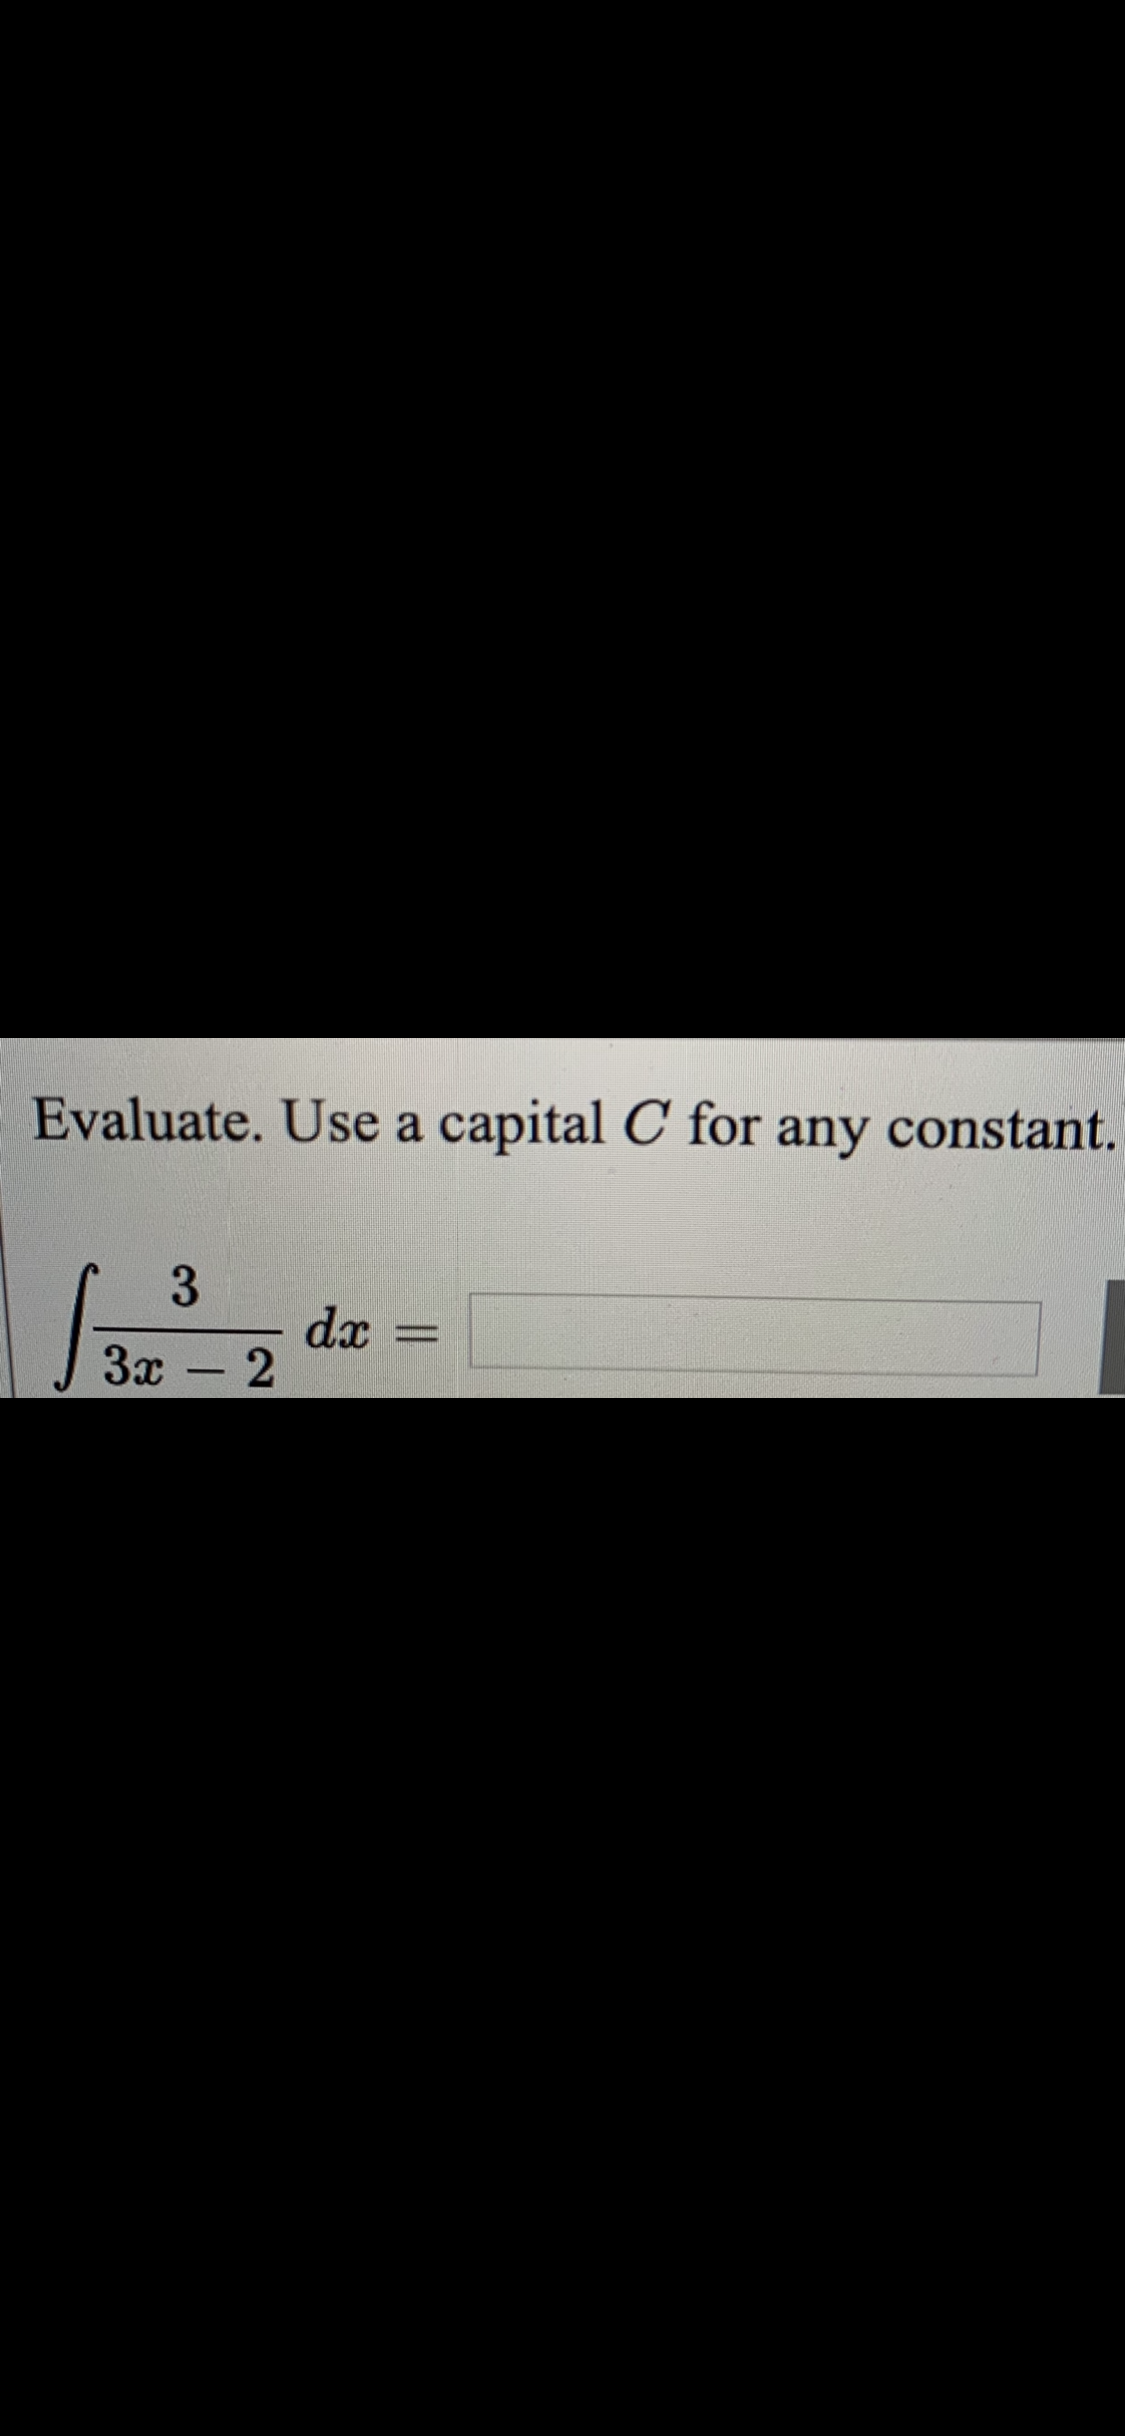 Evaluate. Use a capital C for any constant.
3
dx
За - 2
